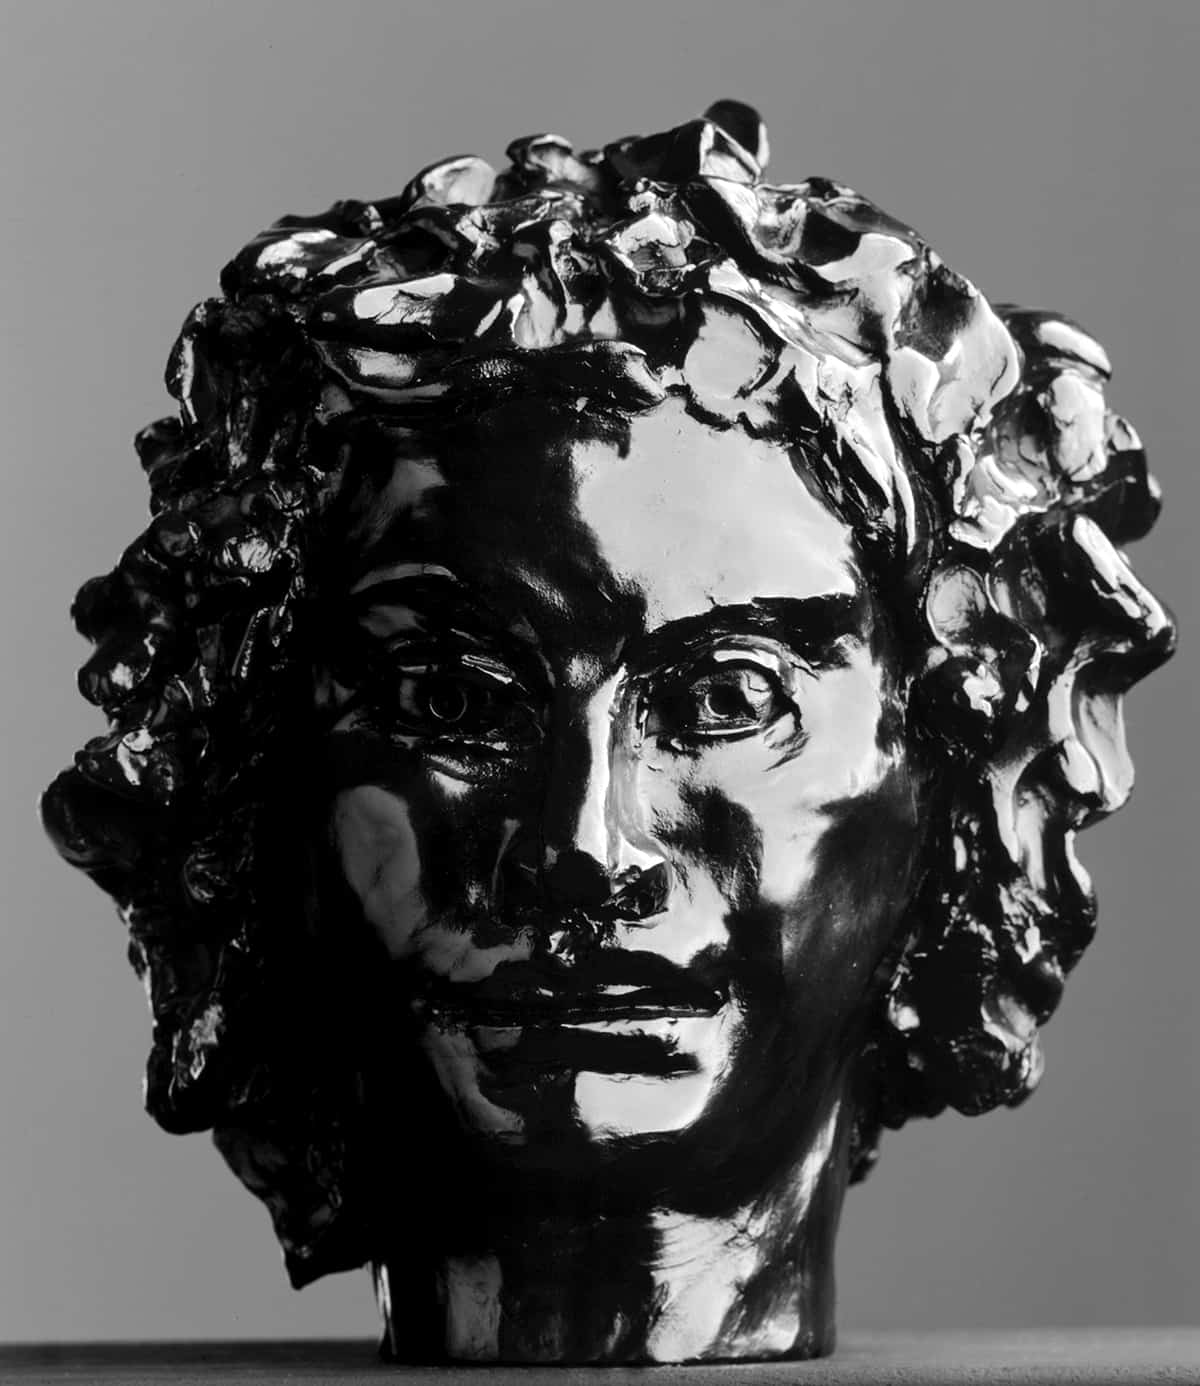 Dionysis by George Condo, 2002 at Galerie Andrea Caratsch